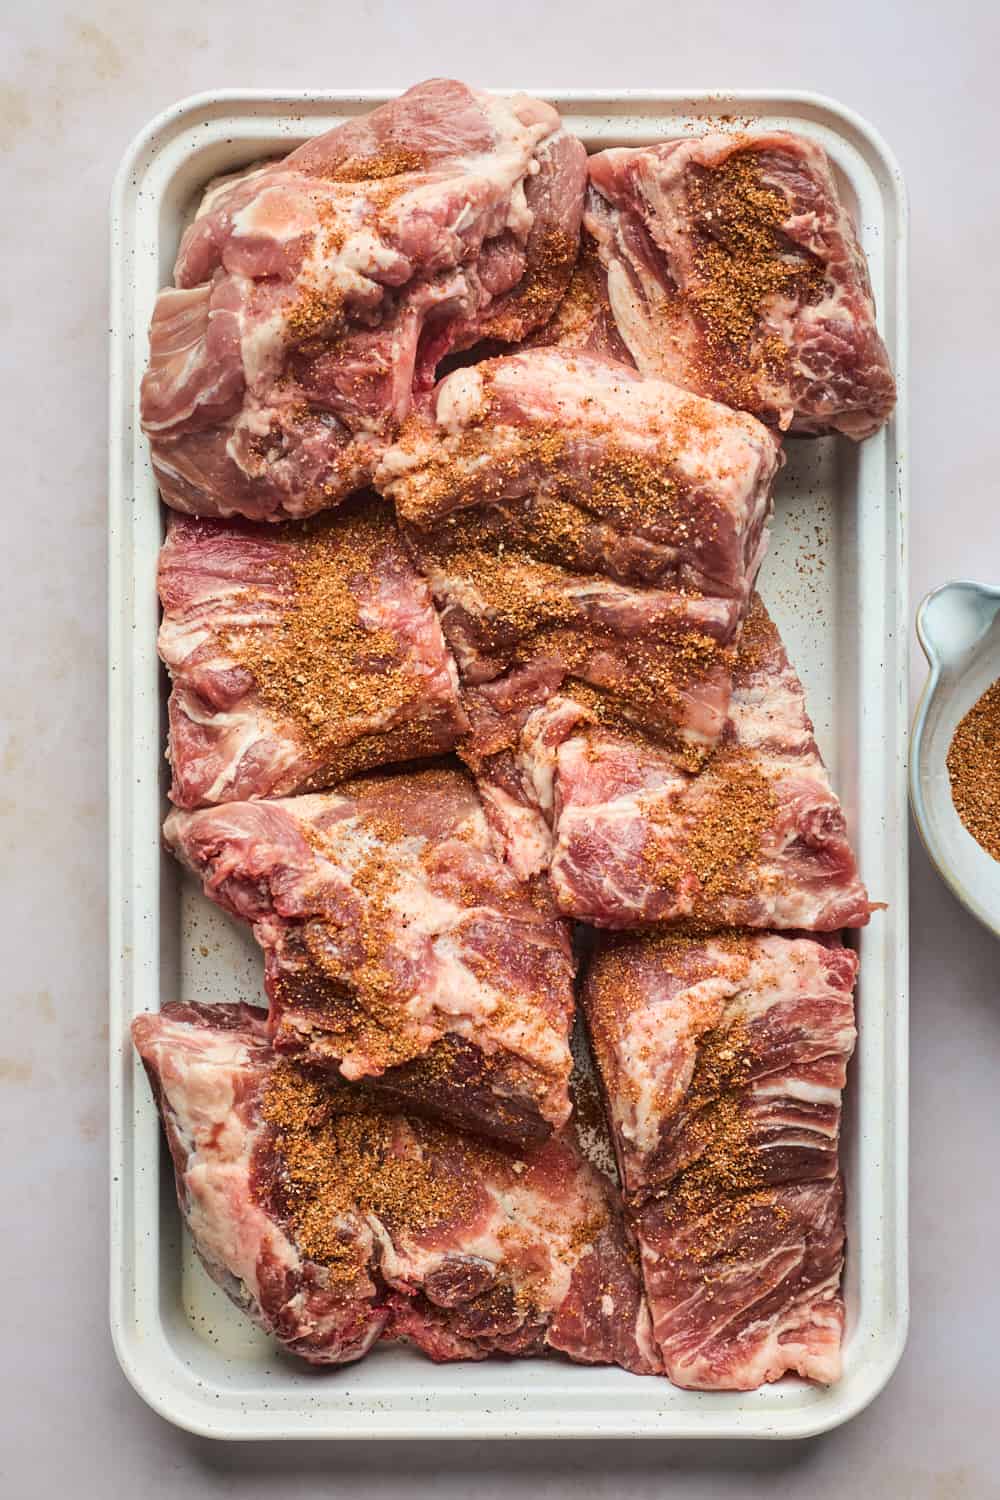 Pork necks on a baking sheet with spices ready to rub into them.